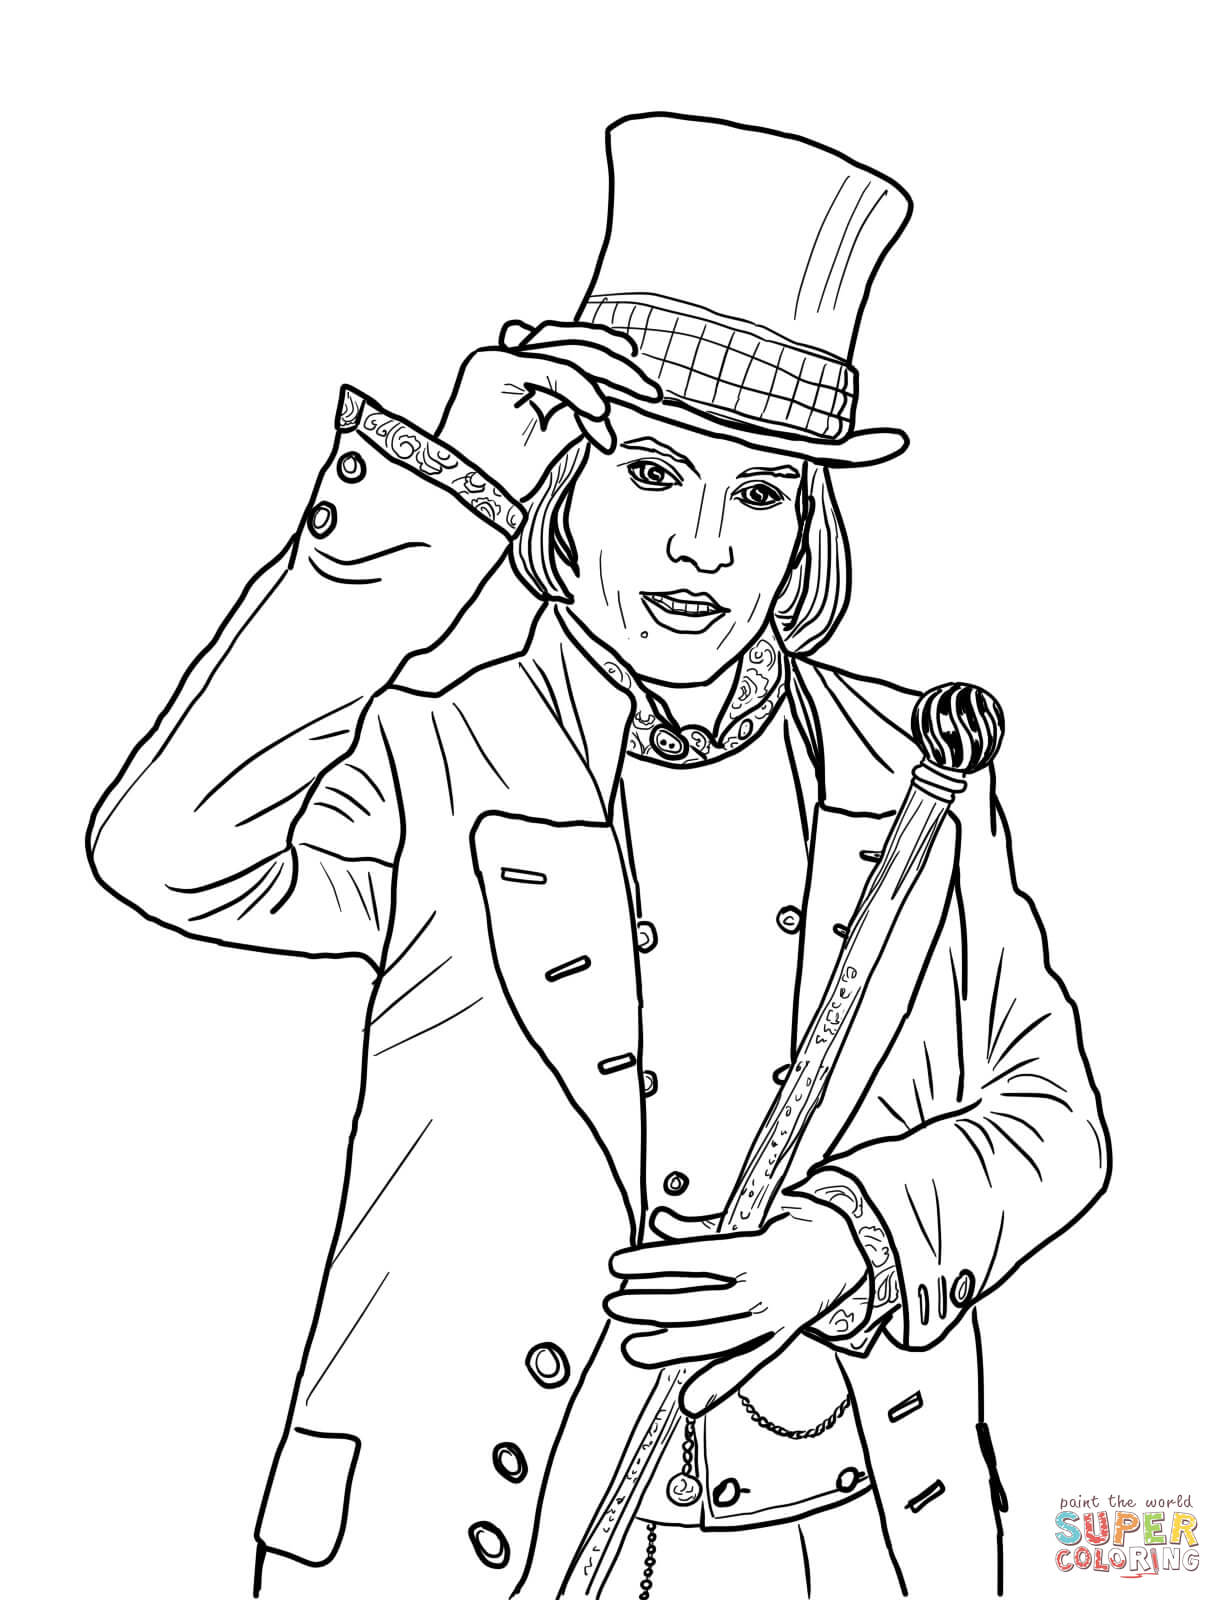 Free Charlie And The Chocolate Factory Coloring Pages, Download Free